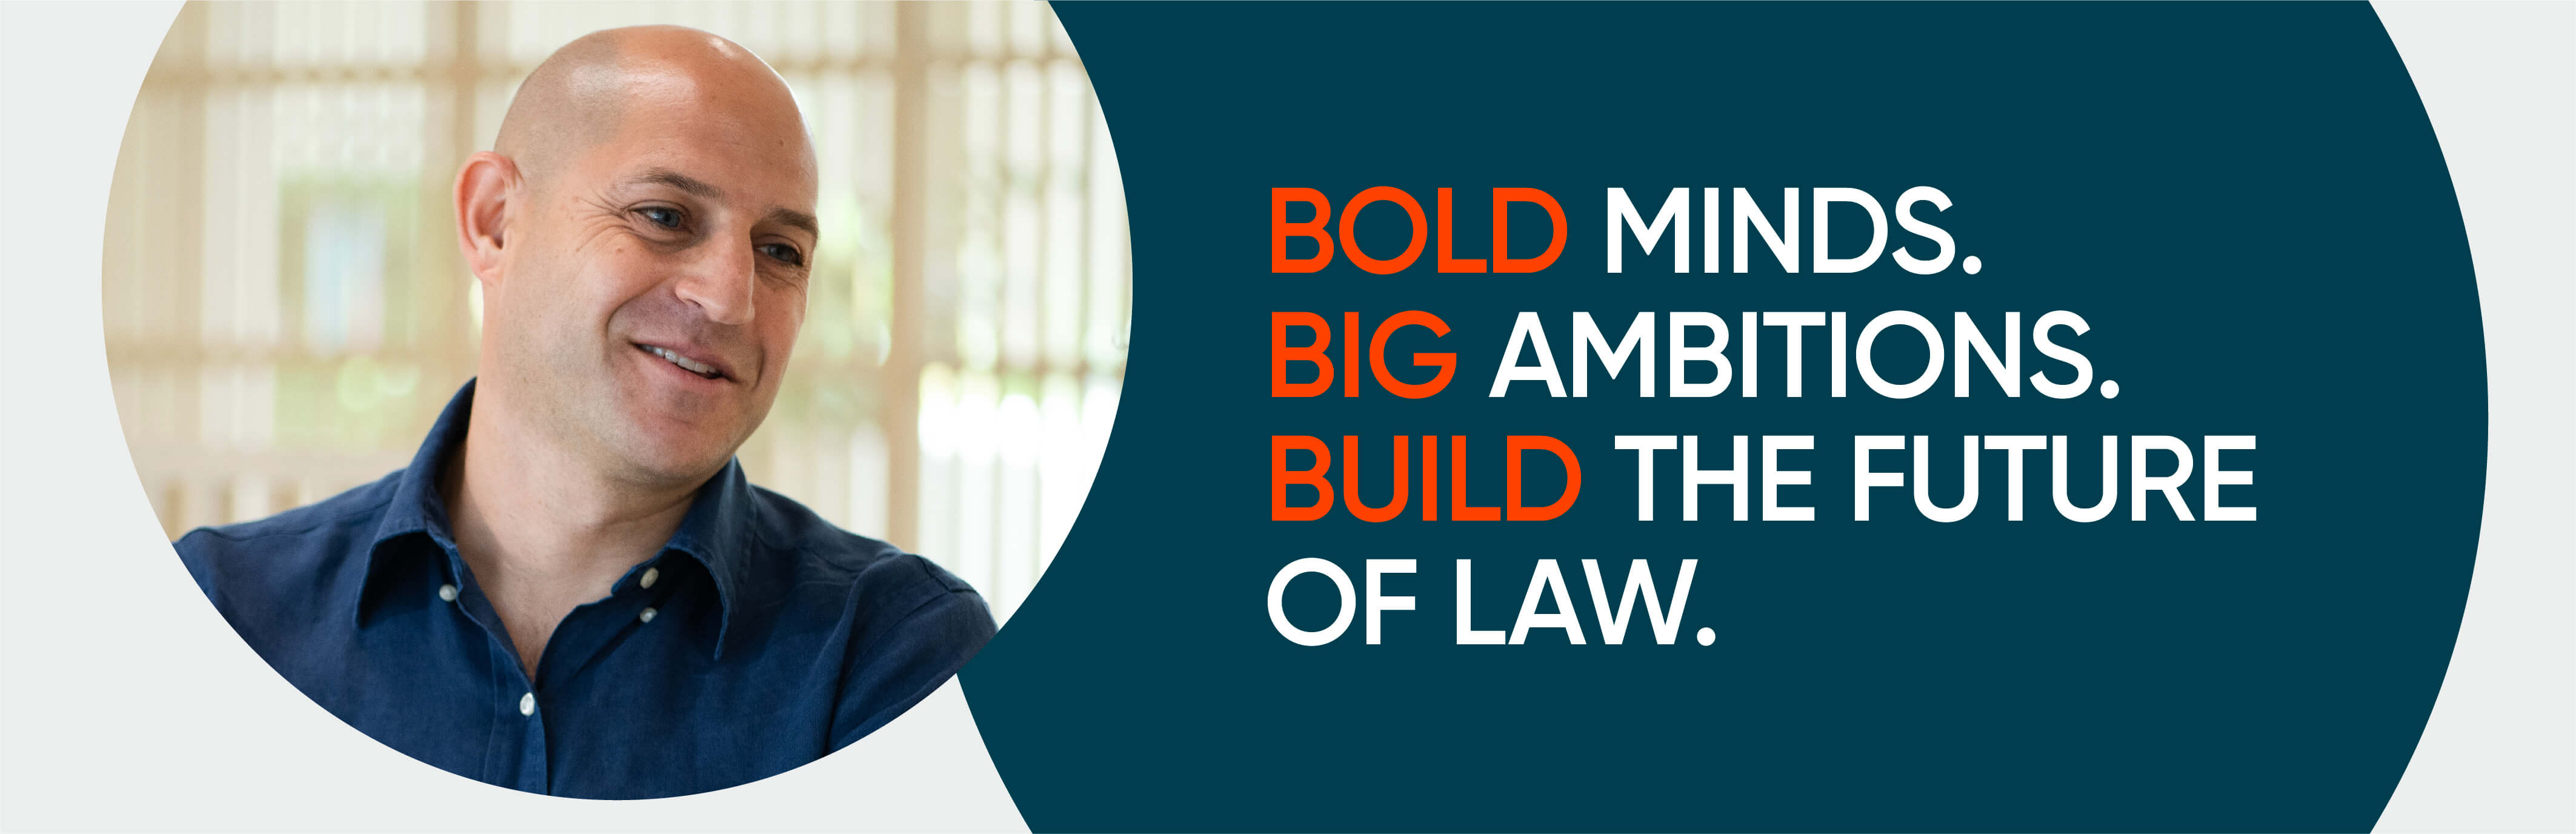 Bold minds. Big ambitions. Build the future of law.